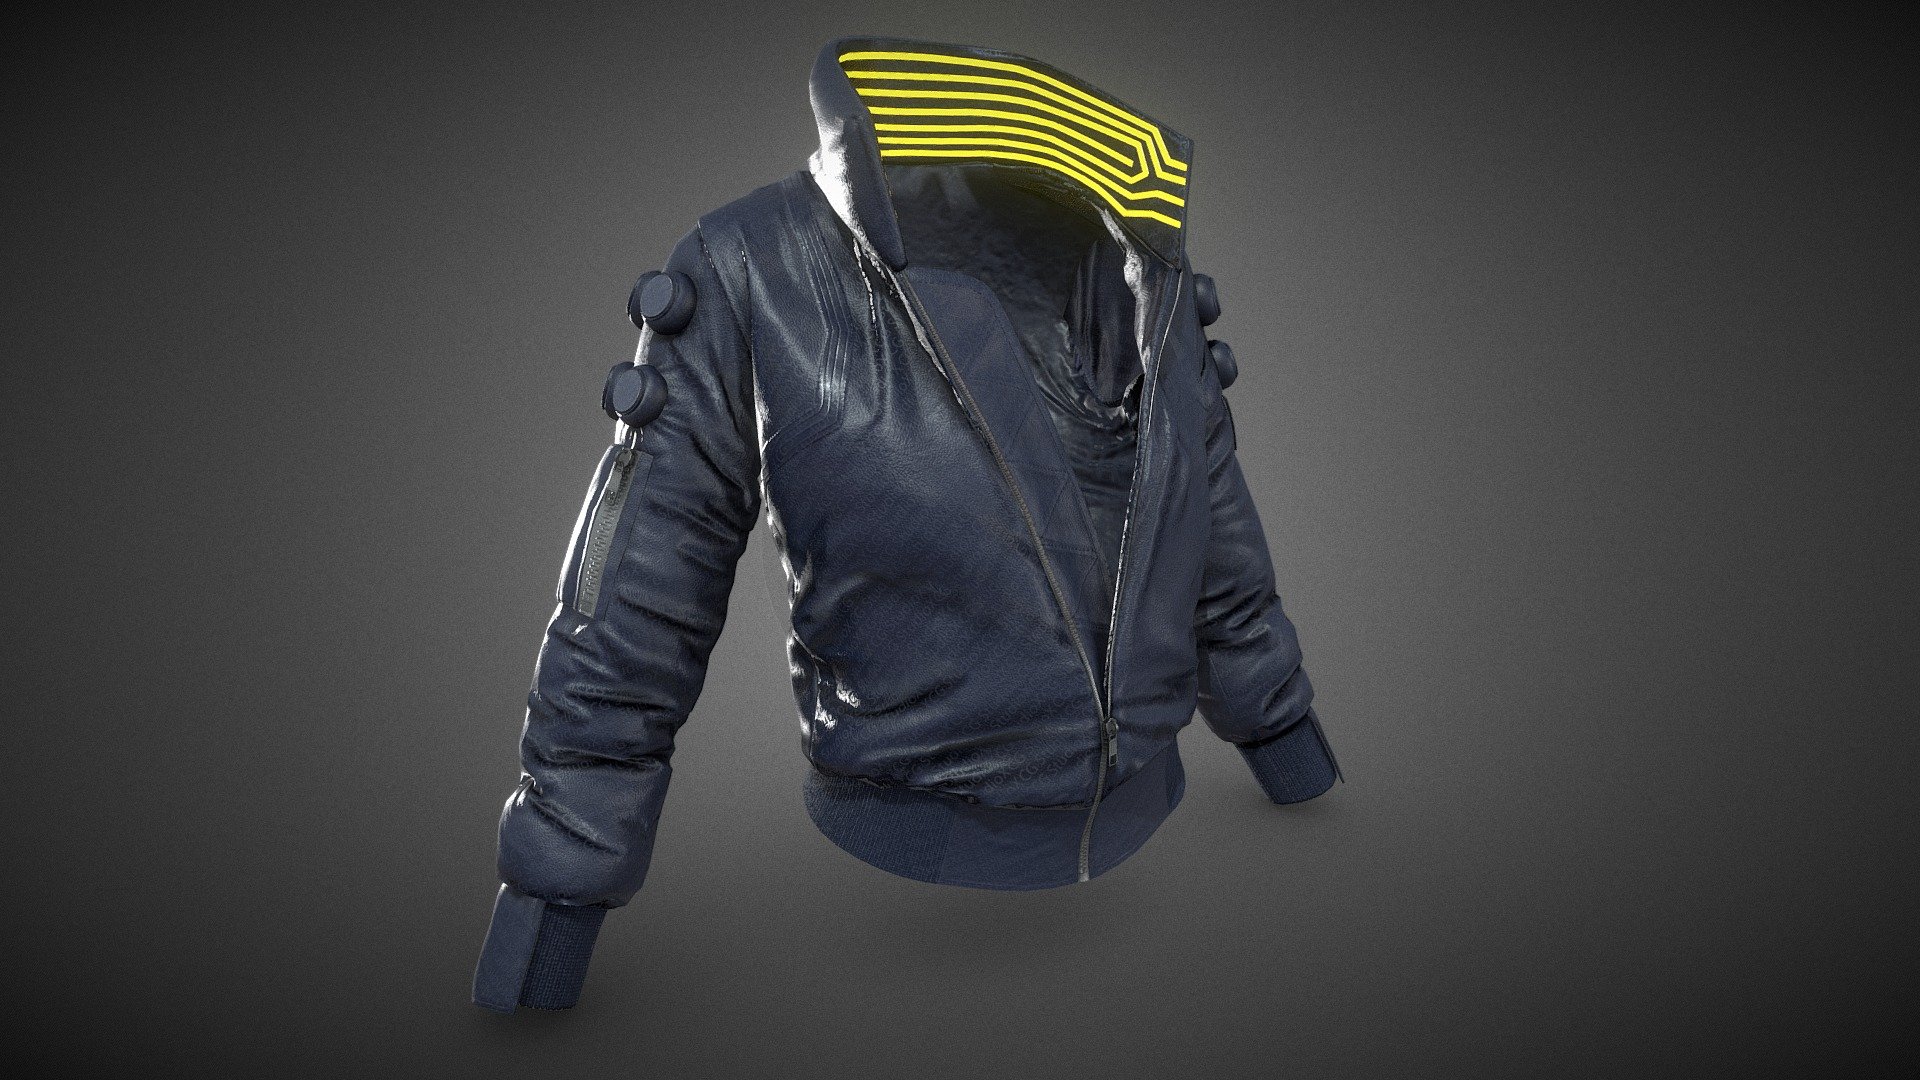 CG StudioX Present :
Cyberpunk Blue Jacket lowpoly/PBR




This is Cyberpunk Blue Jacket Comes with Specular and Metalness PBR.

The photo been rendered using Marmoset Toolbag 4 (real time game engine )


Features :



Comes with Specular and Metalness PBR 4K texture .

Good topology.

Low polygon geometry.

The Model is prefect for game for both Specular workflow as in Unity and Metalness as in Unreal engine .

The model also rendered using Marmoset Toolbag 4 with both Specular and Metalness PBR and also included in the product with the full texture.

The texture can be easily adjustable .


Texture :



One set of UV [Albedo -Normal-Metalness -Roughness-Gloss-Specular-Ao-Emissive] (4096*4096)


Files :
Marmoset Toolbag 4 ,Maya,,FBX,OBj with all the textures.




Contact me for if you have any questions.
 - Cyberpunk Blue Jacket - Buy Royalty Free 3D model by CG StudioX (@CG_StudioX) 3d model